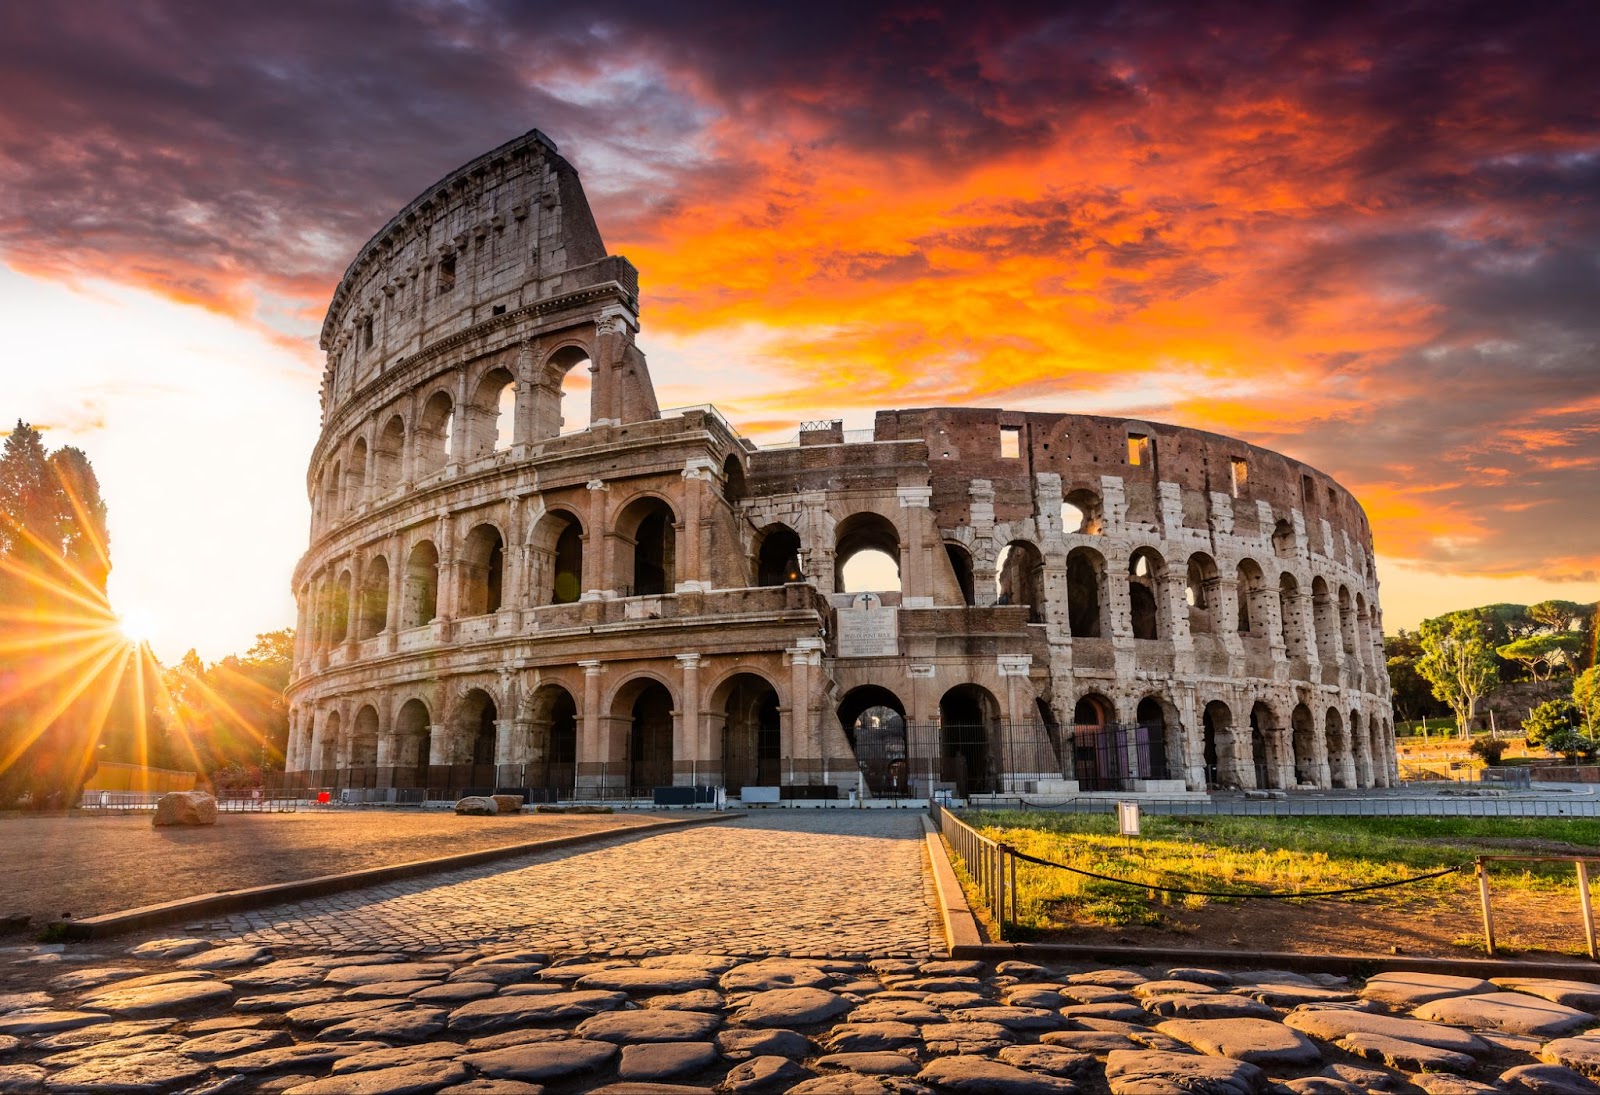 Most Incredible UNESCO Cities Worldwide: Rome, Italy